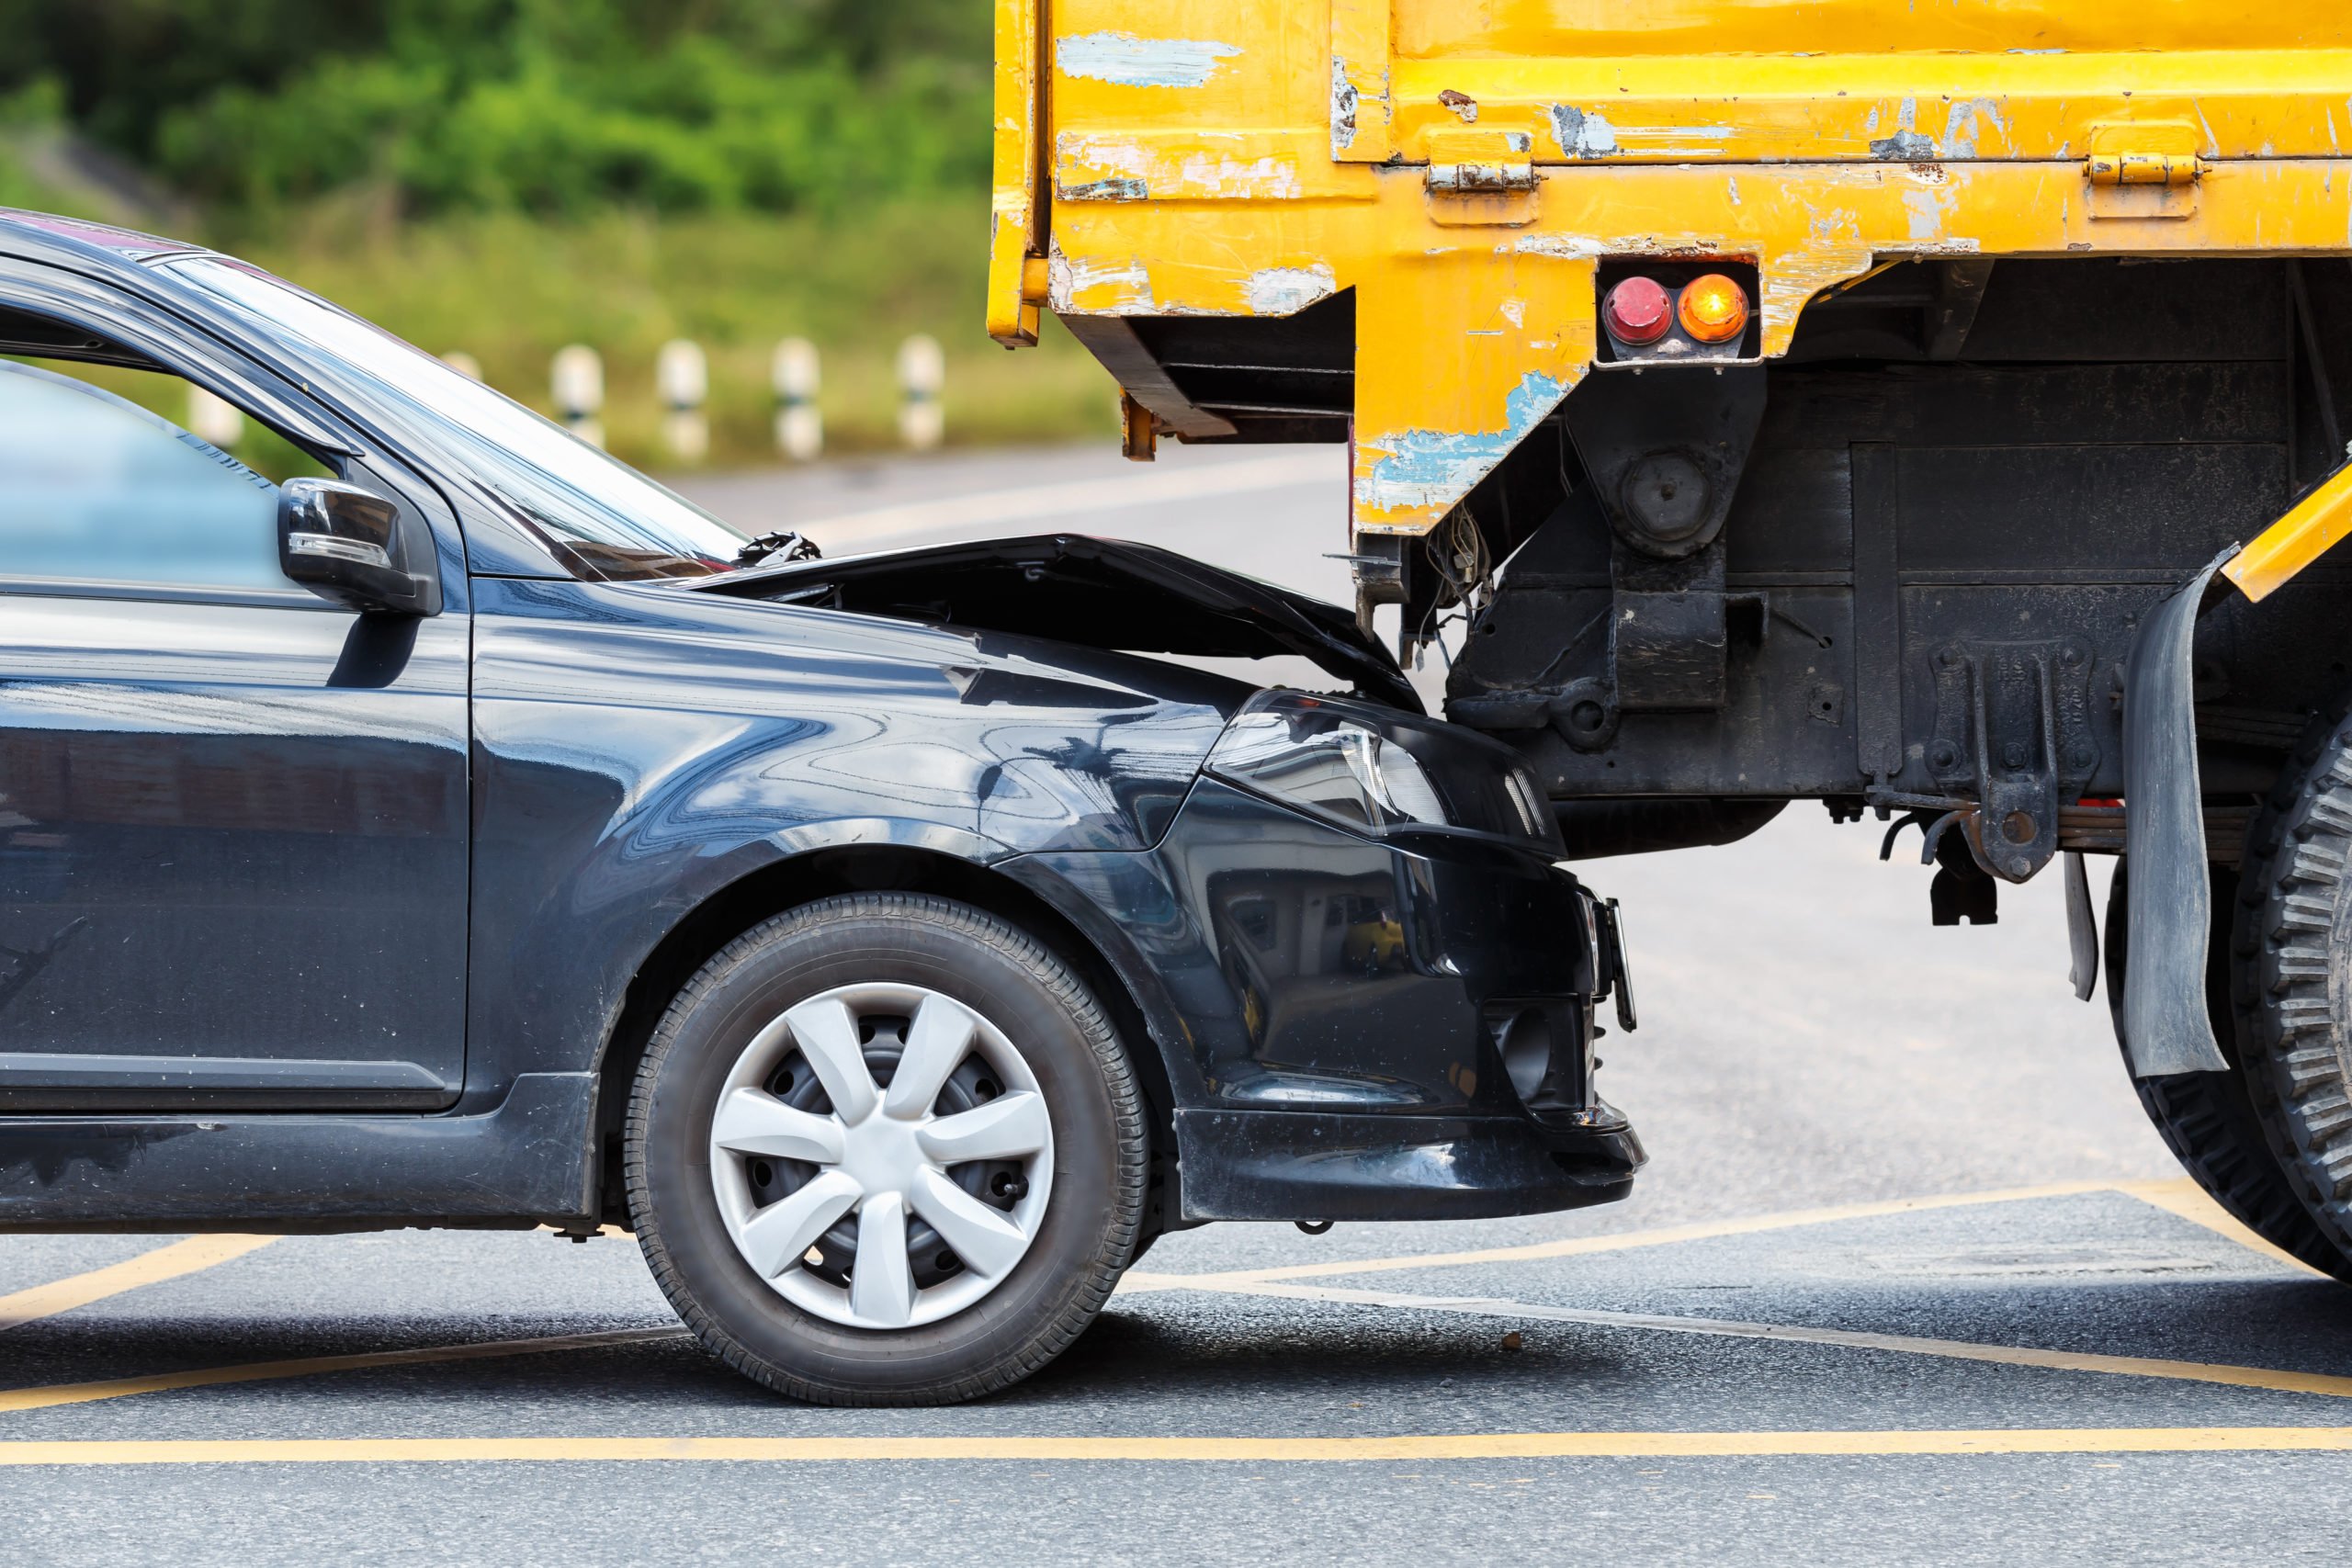 if my car is totaled in a rear-end collision with a commercial truck do i need a car accident attorney or a trucking accident attorney